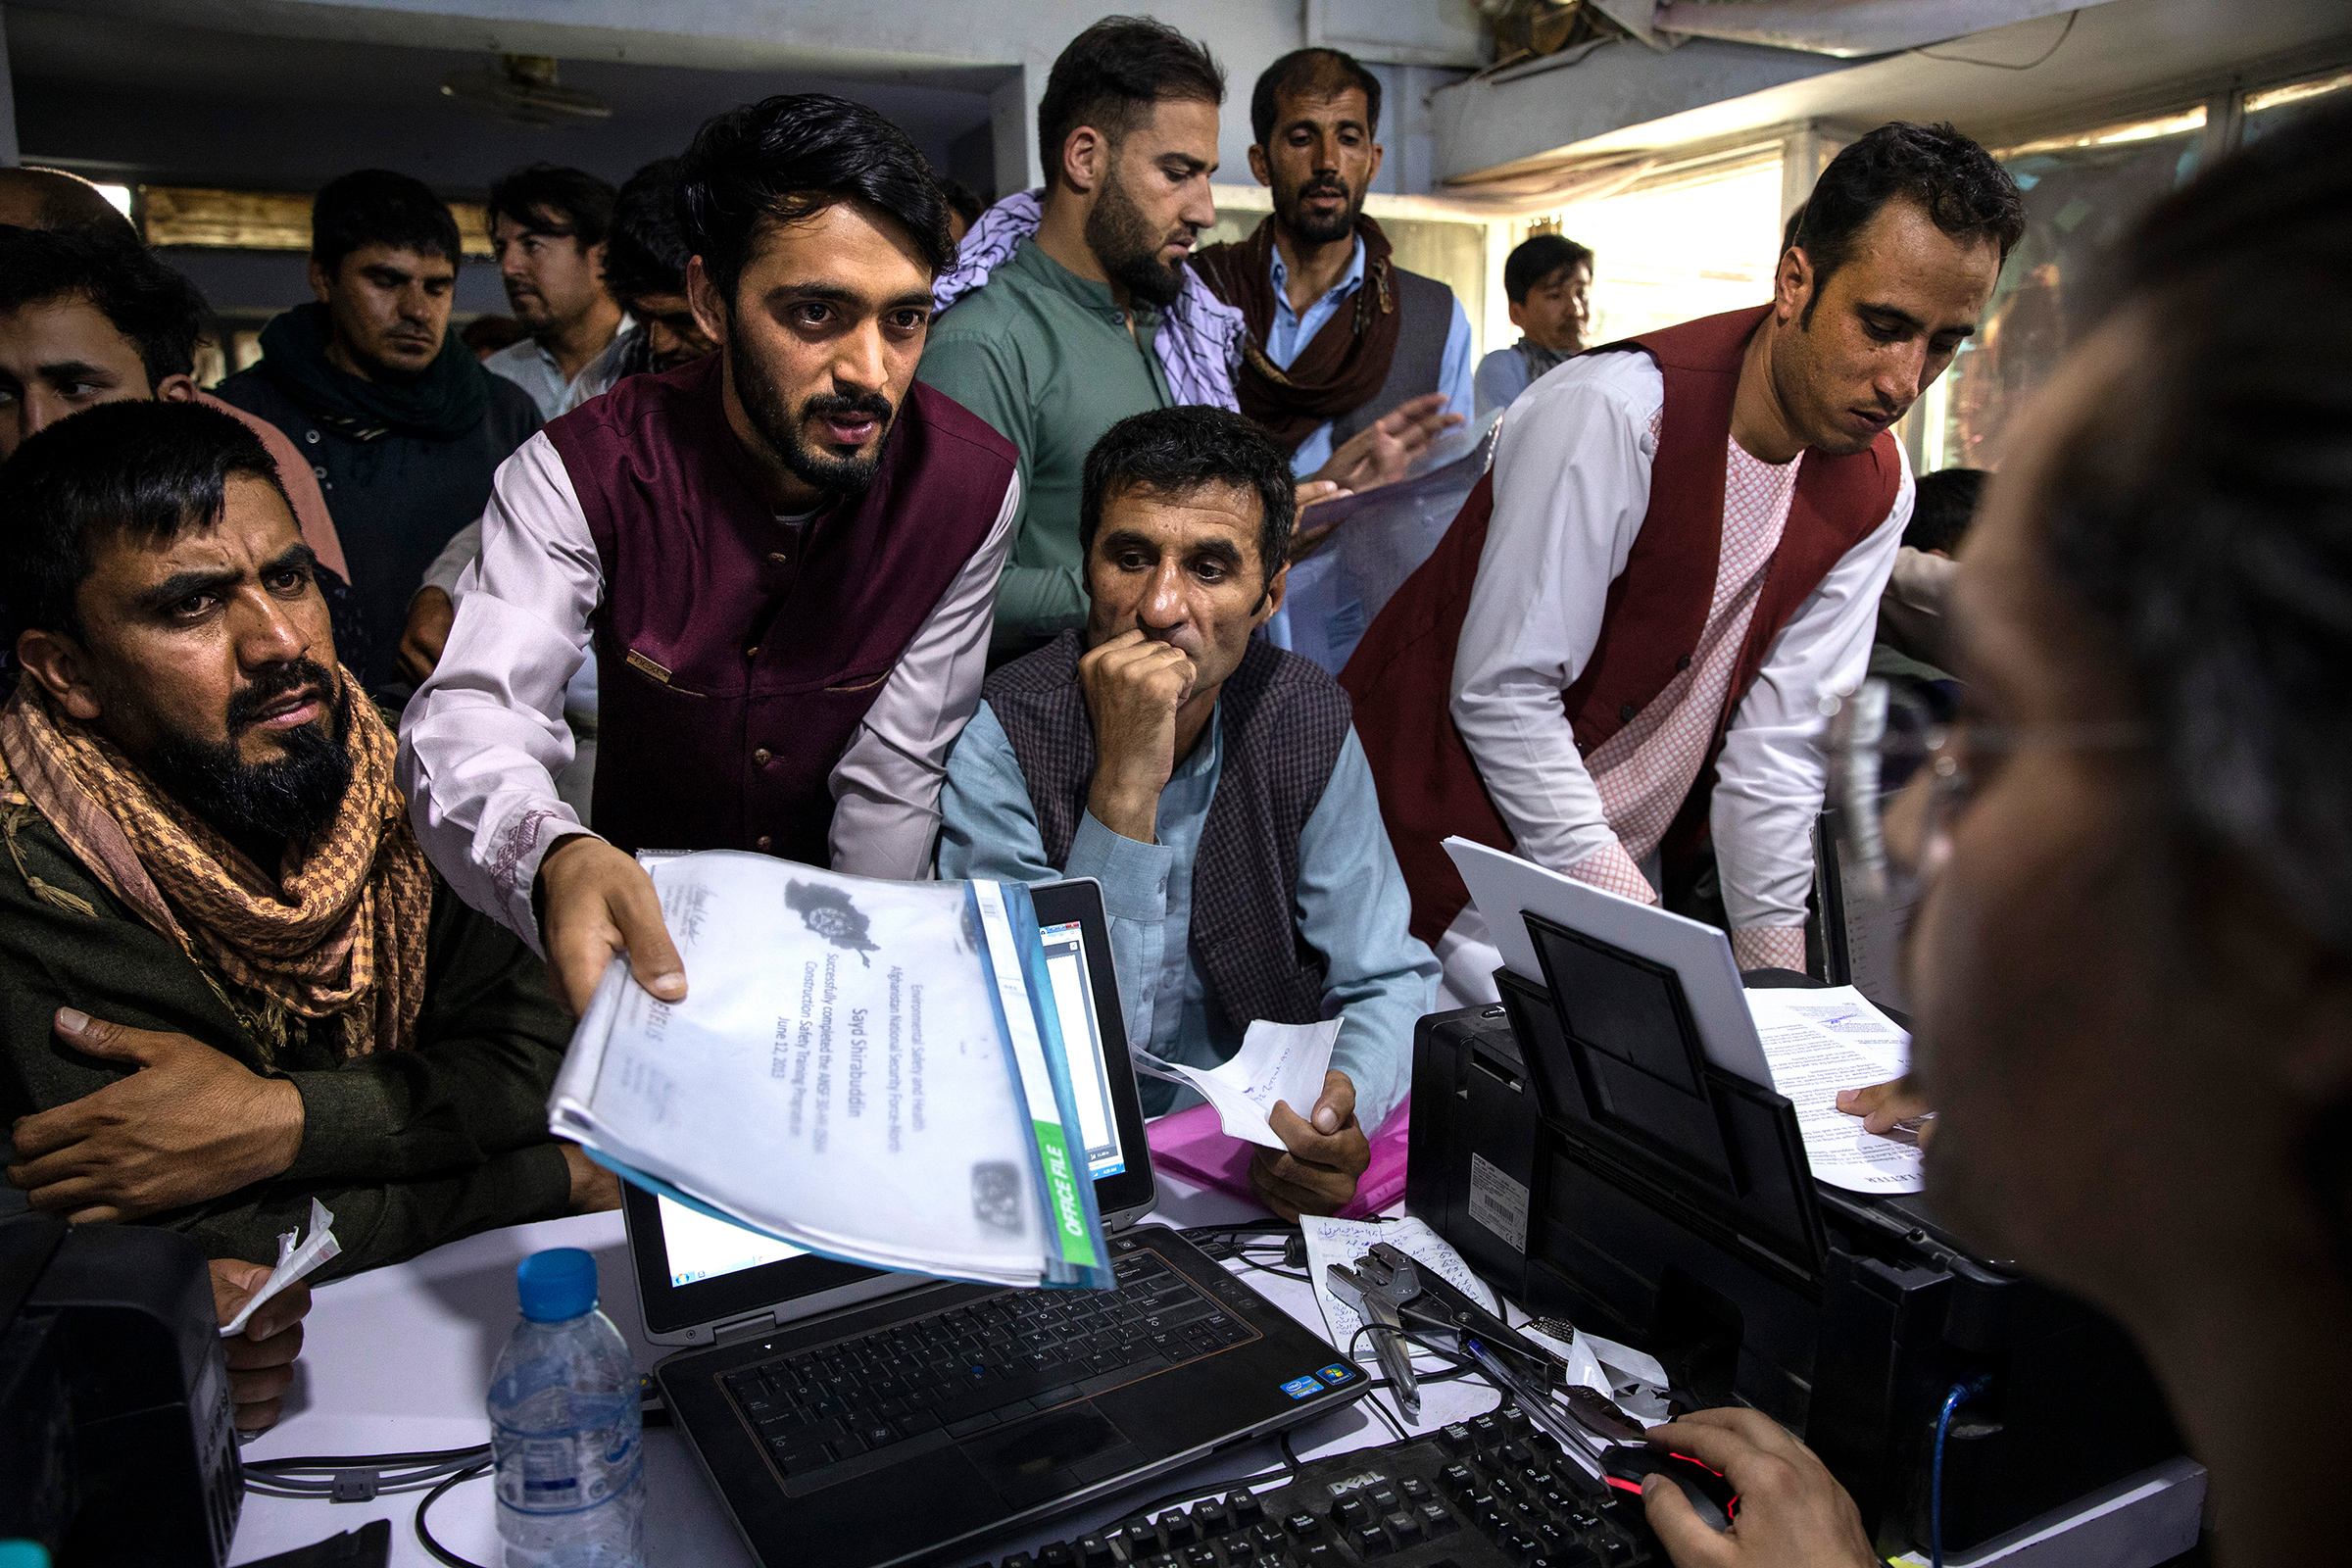 Men crowd into an Internet café while seeking help with applications for the Special Immigrant Visa program in Kabul on Aug. 8. (Paula Bronstein—Getty Images)